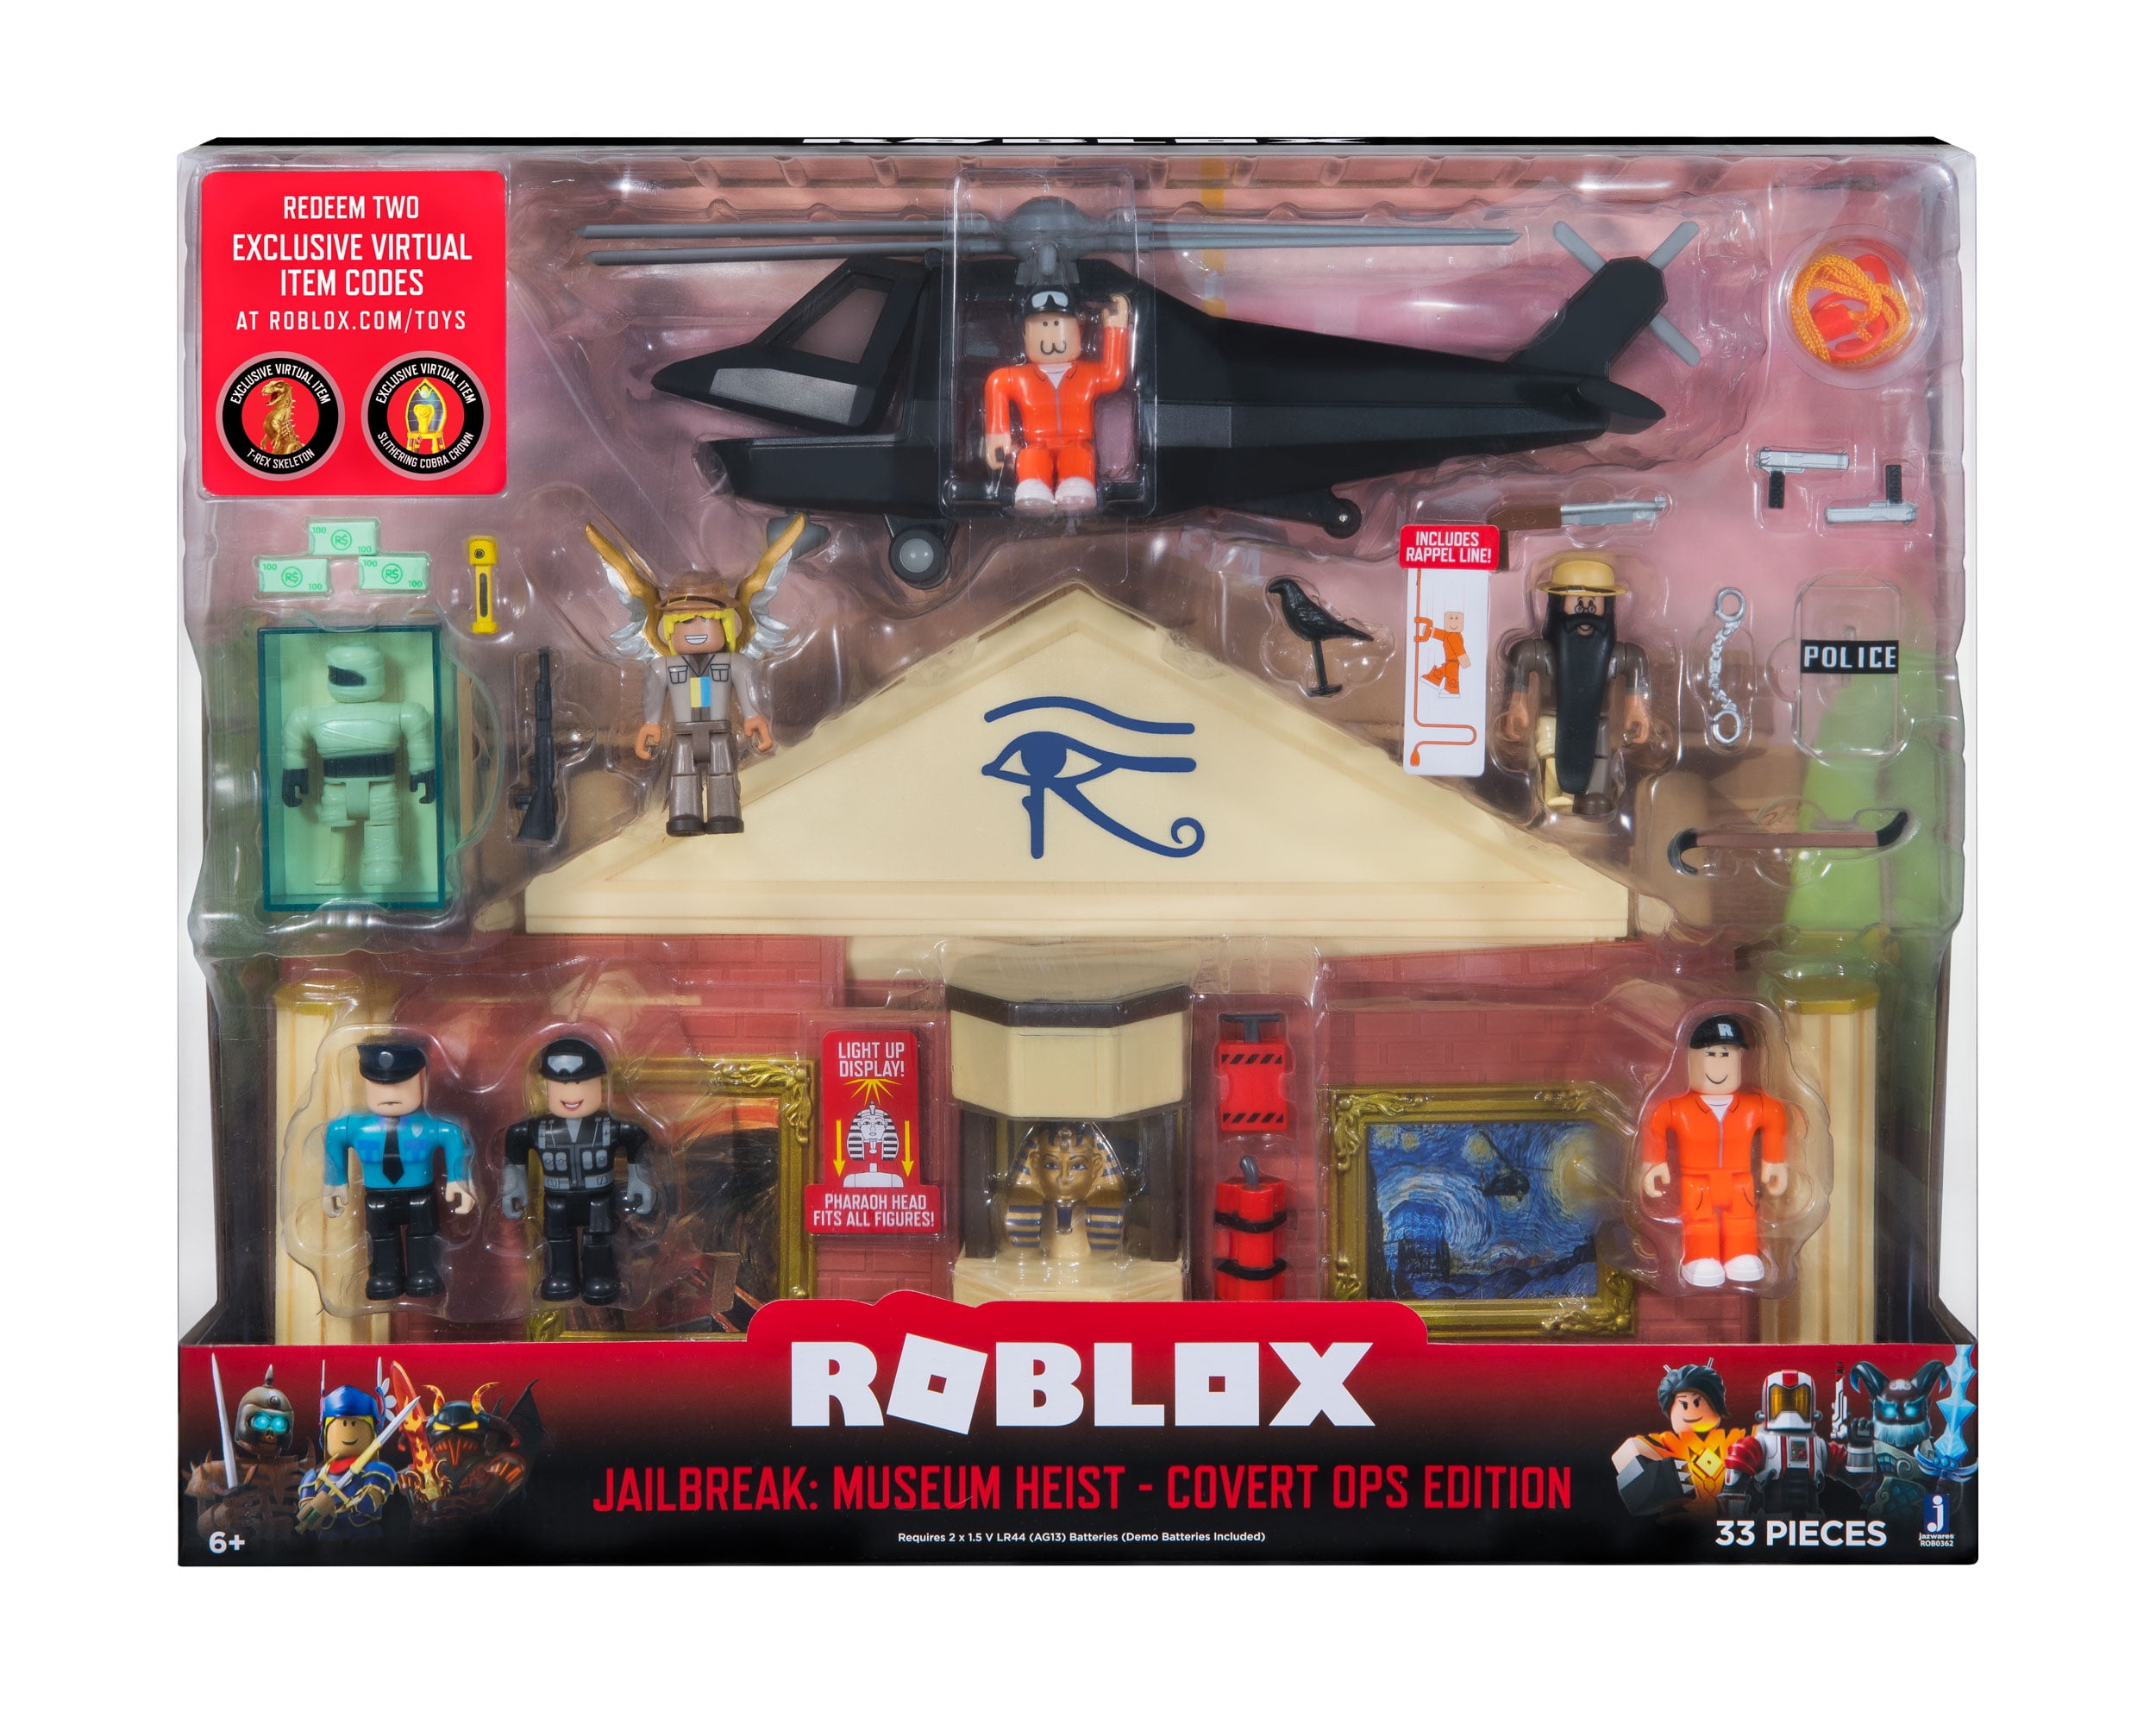 Roblox Action Collection Jailbreak Museum Heist Covert Ops Edition Playset Includes Two Exclusive Virtual Items Walmart Com Walmart Com - 100 roblox gamecard related keywords suggestions 100